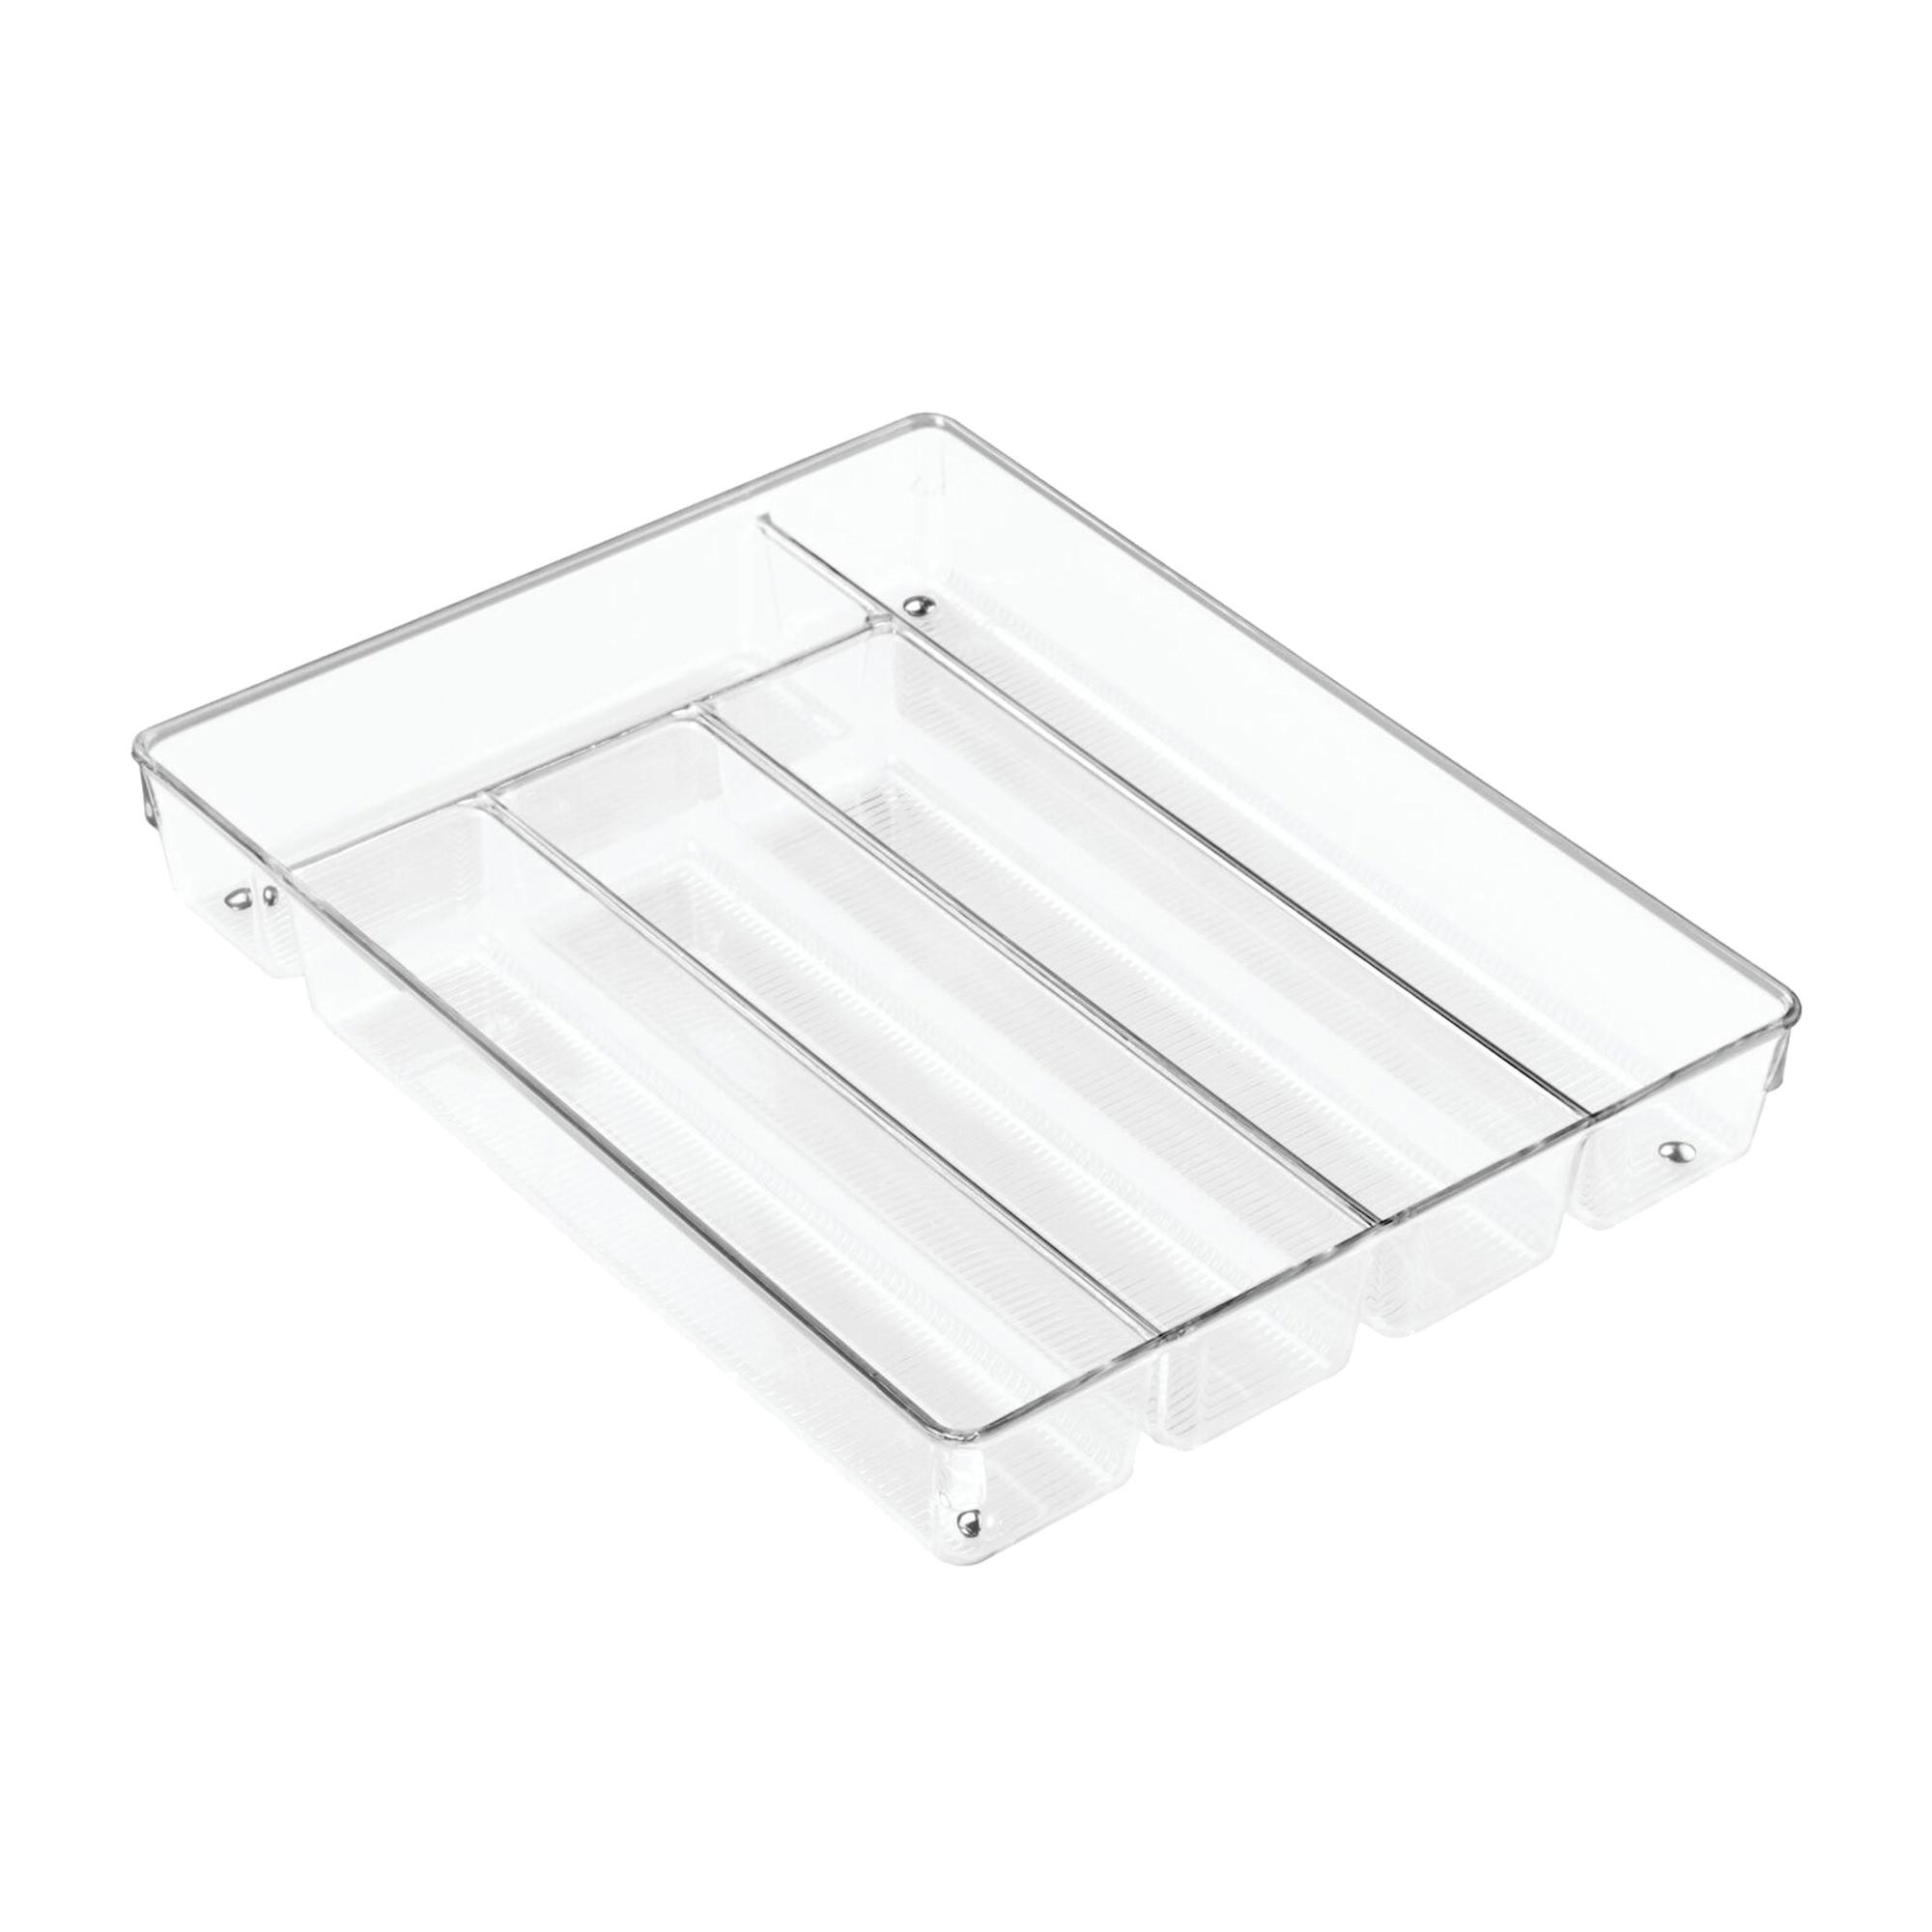 iDesign Linus Cutlery Tray 5 Compartment Clear Image 1